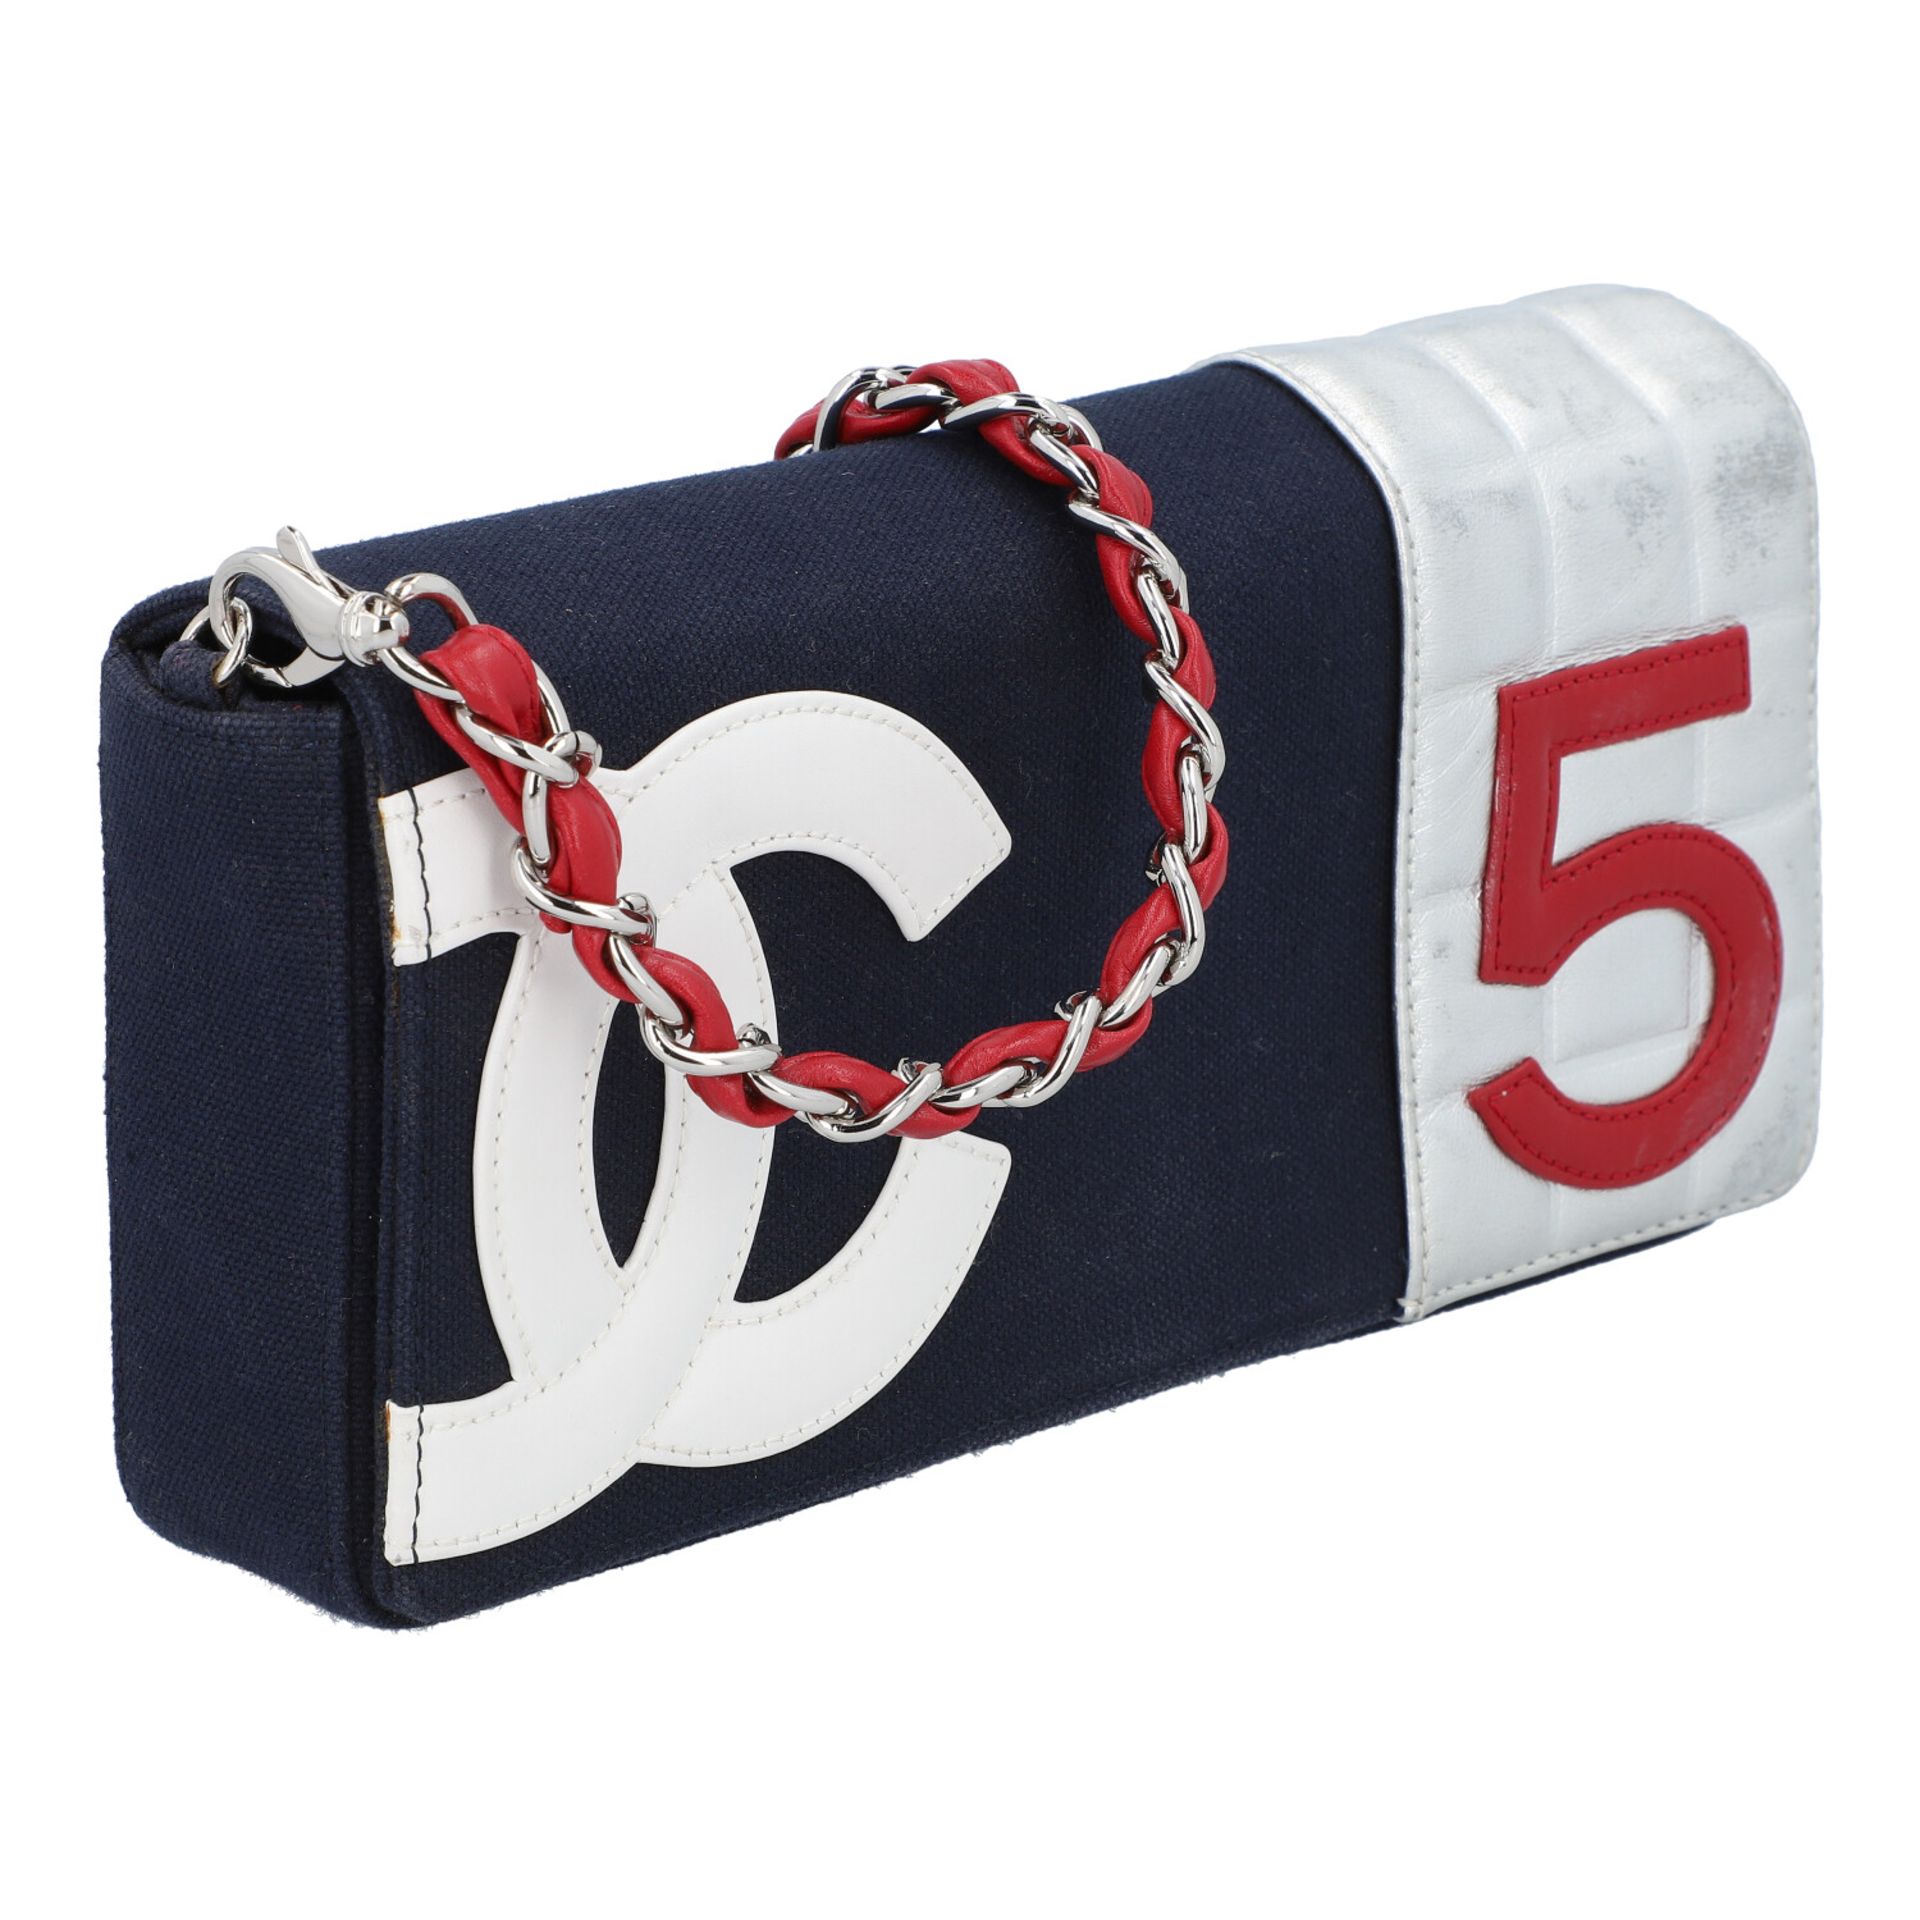 CHANEL Schultertasche "No. 5". - Image 2 of 8